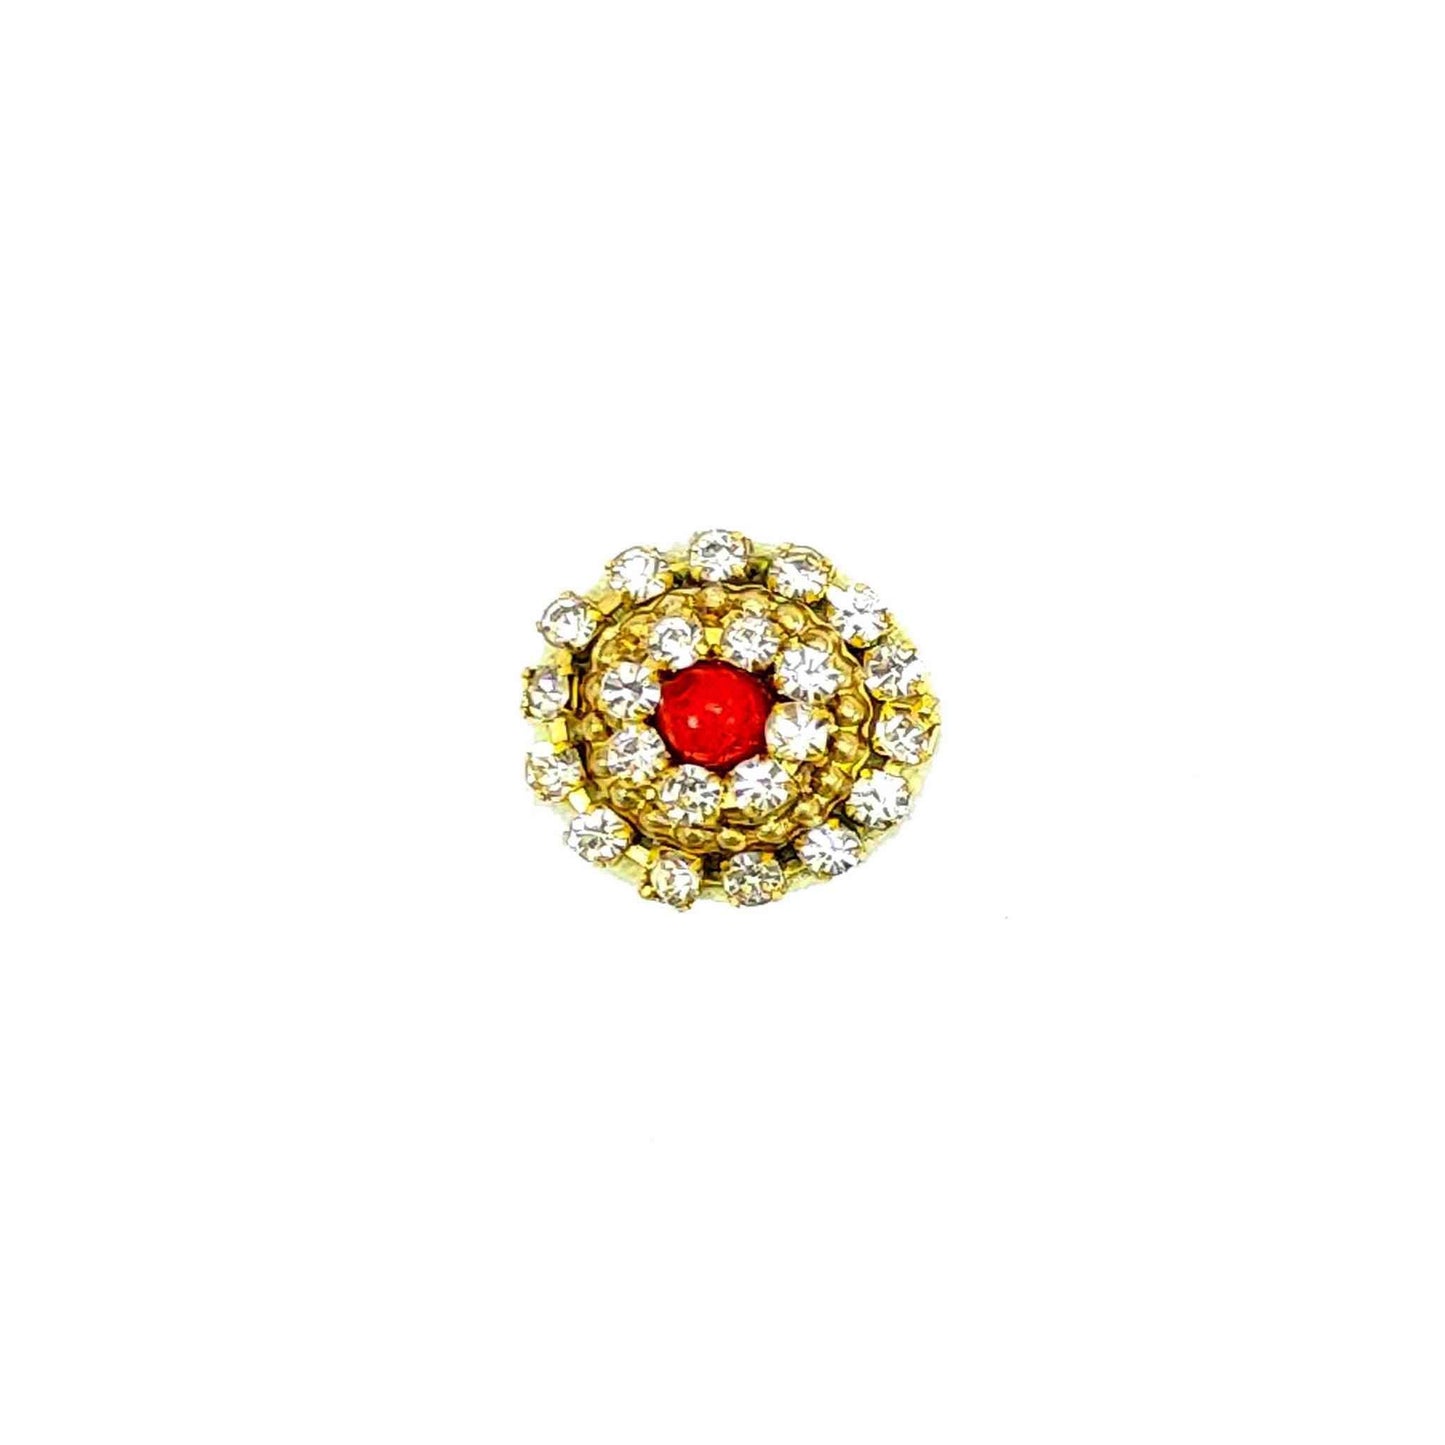 Indian Petals Rhinestone Studded Buti for DIY Craft, Trousseau Packing or Decoration (Bunch of 12) - Design 220, Red - Indian Petals